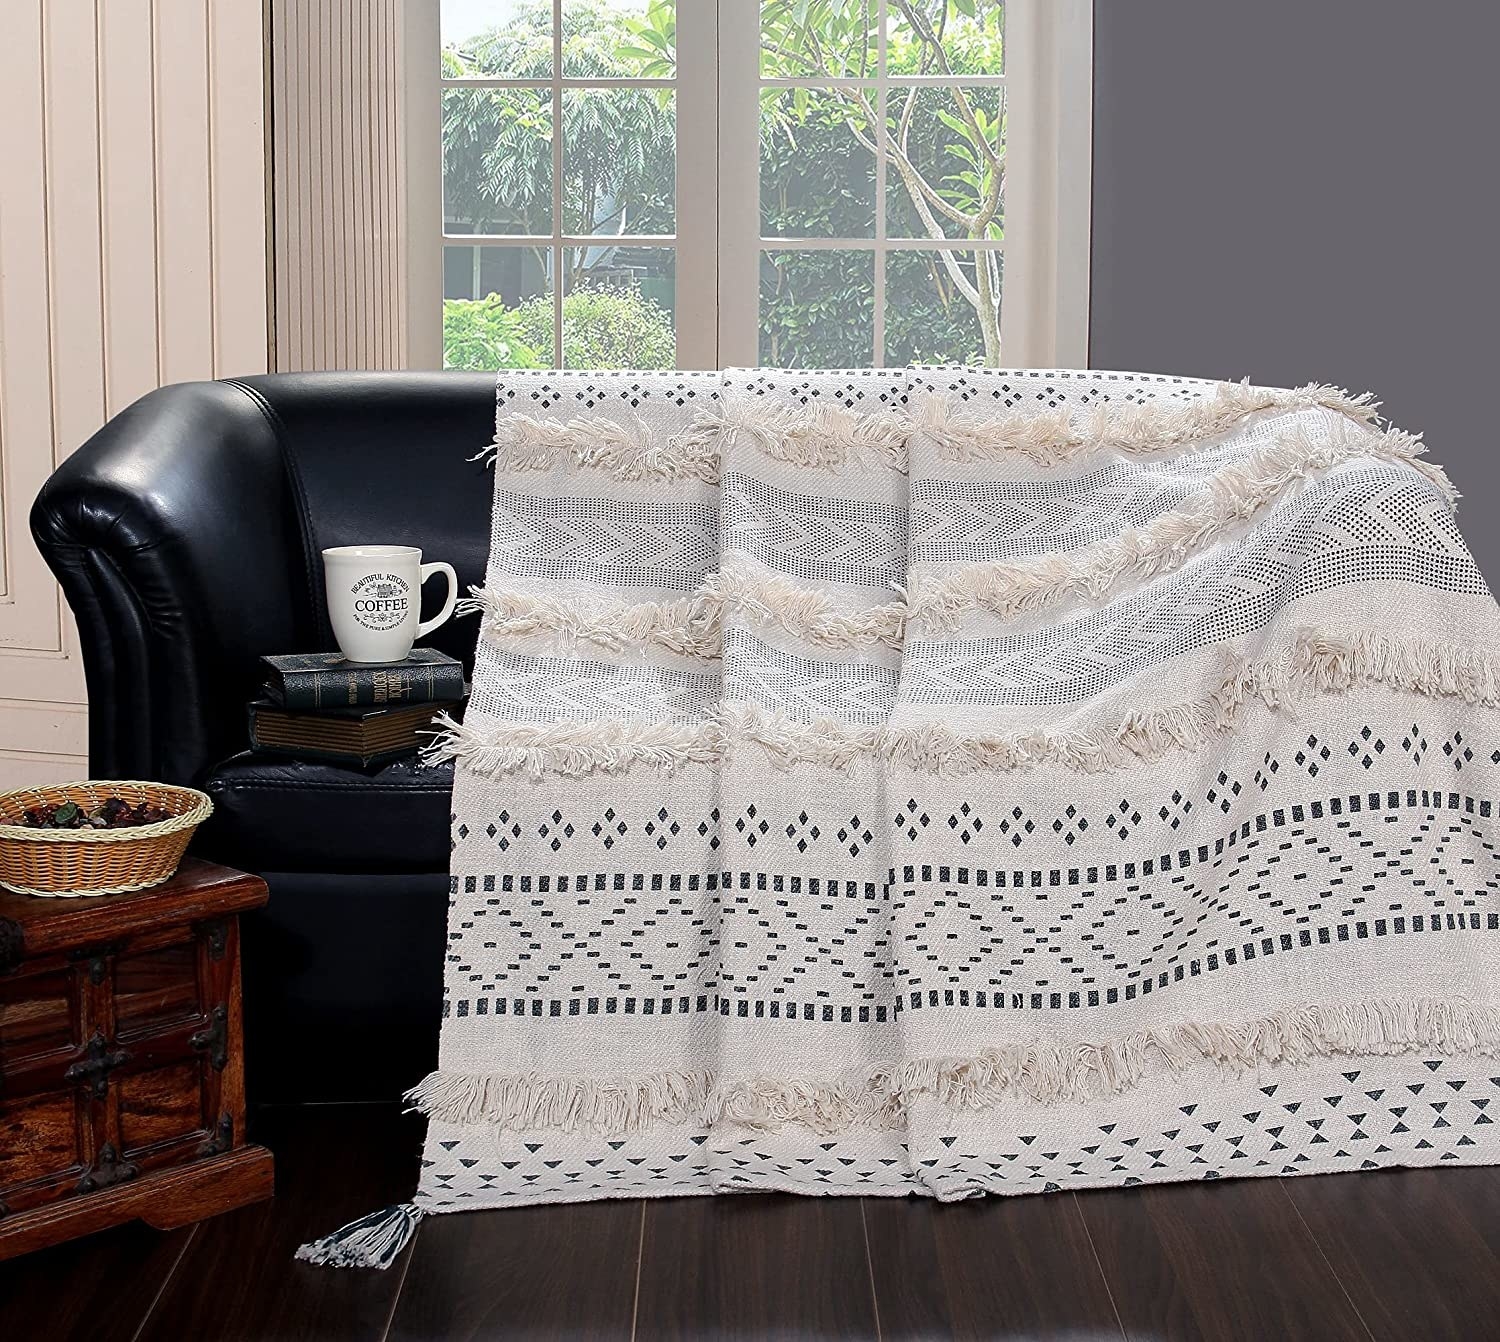 A  black and white throw with frills on it and geometric patterns